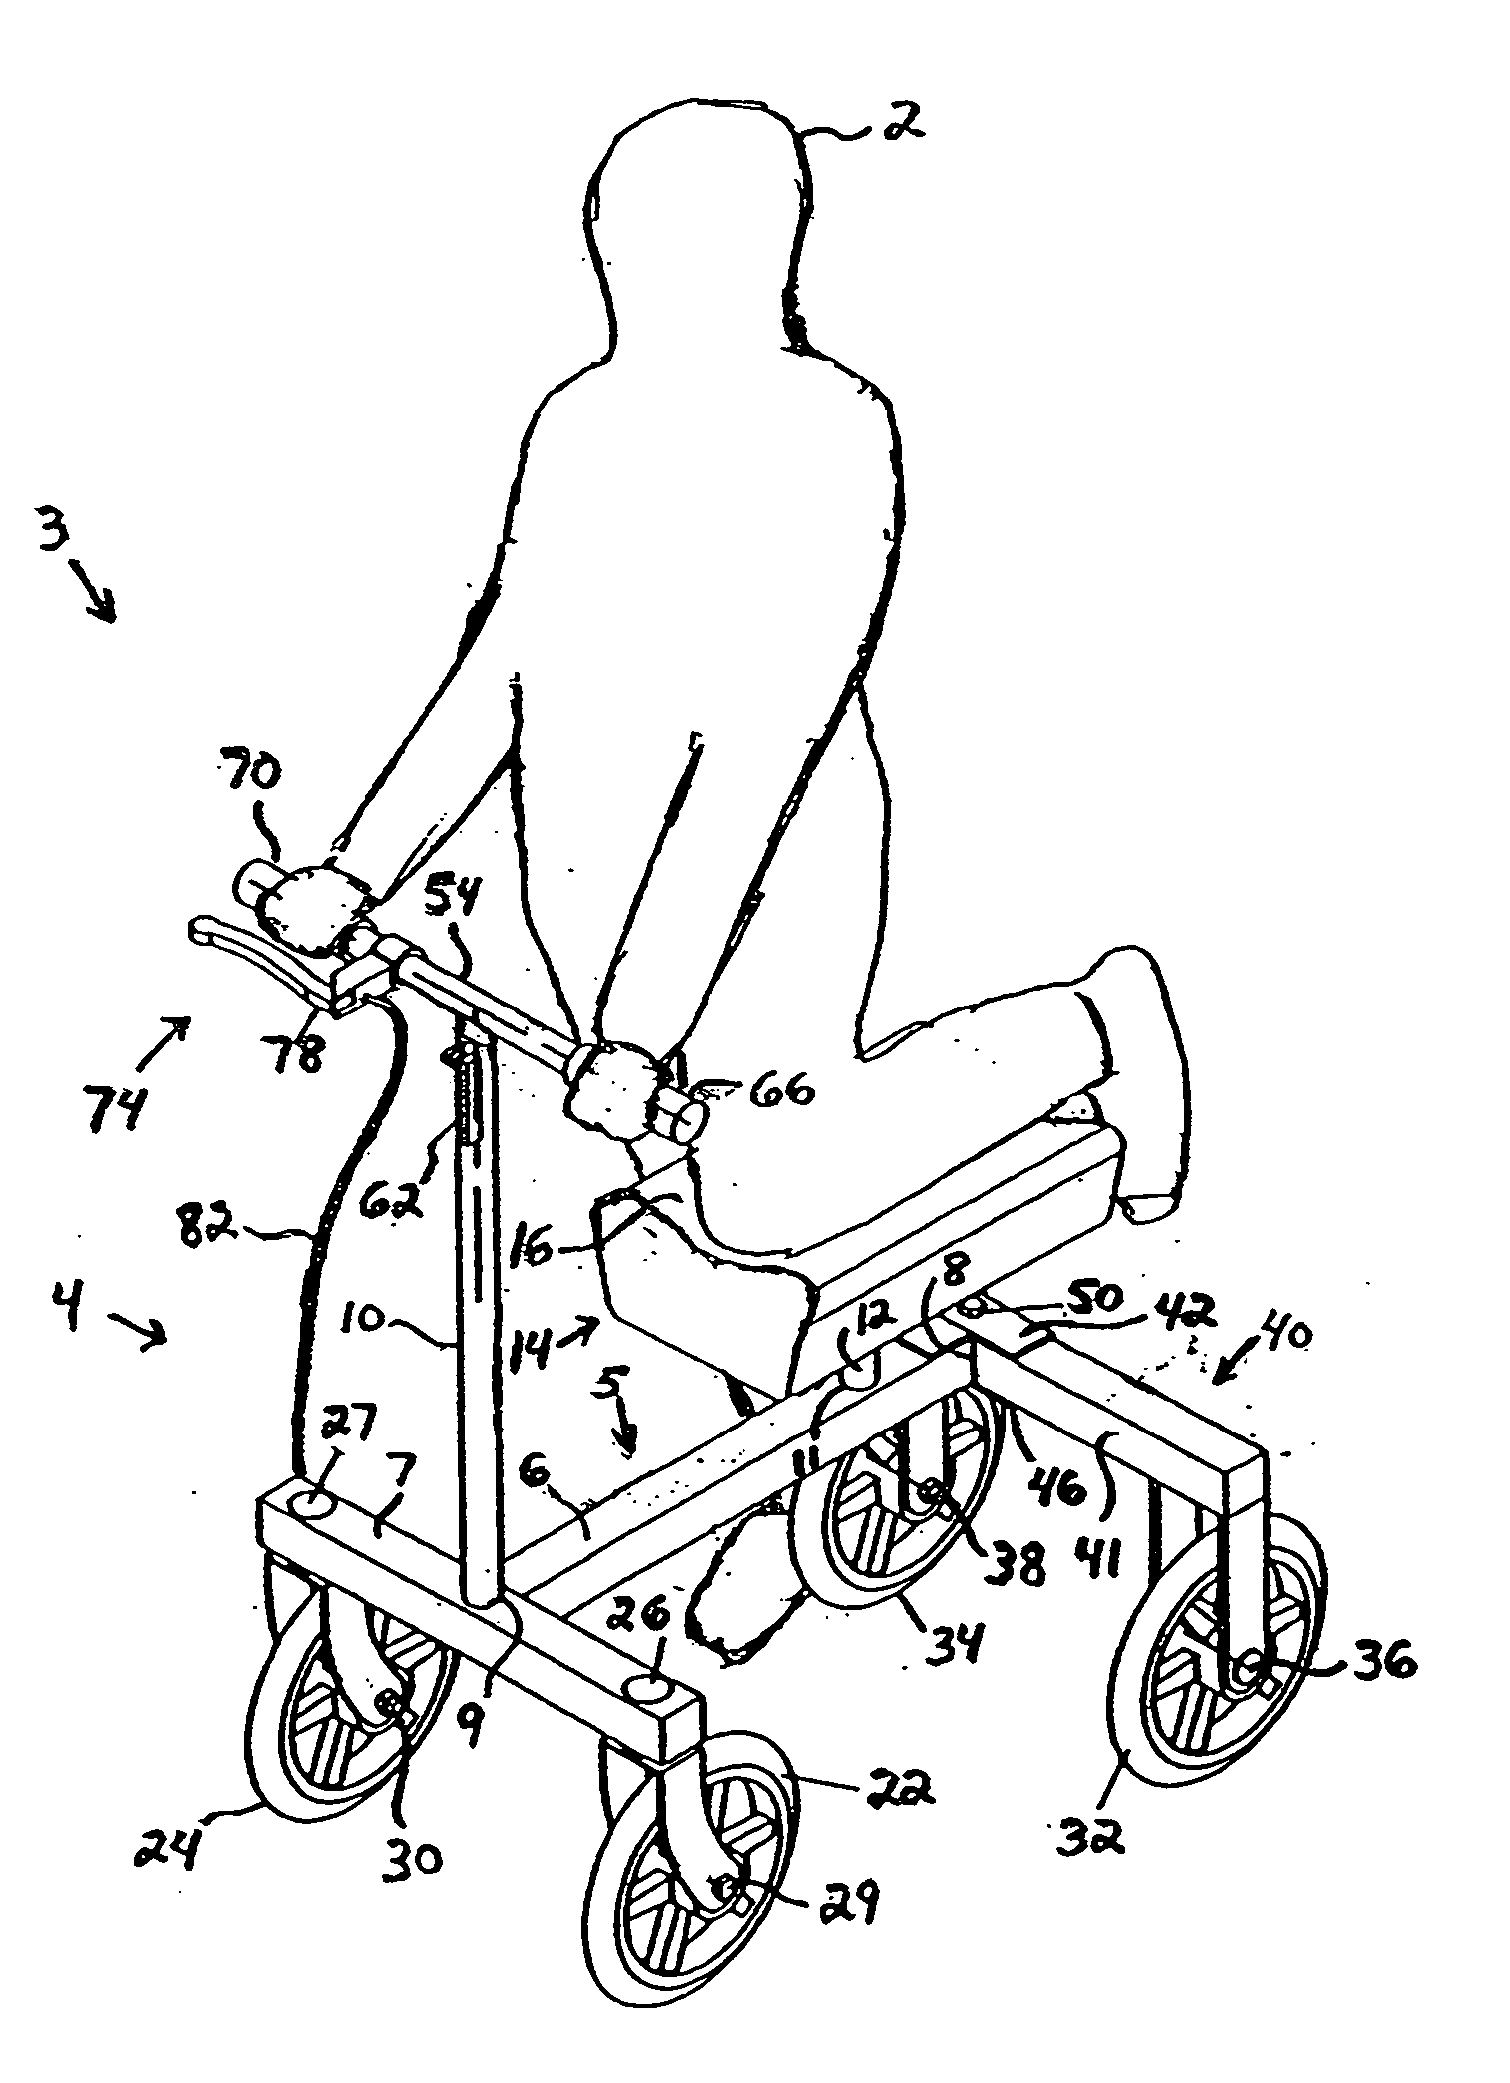 Cart for injured person